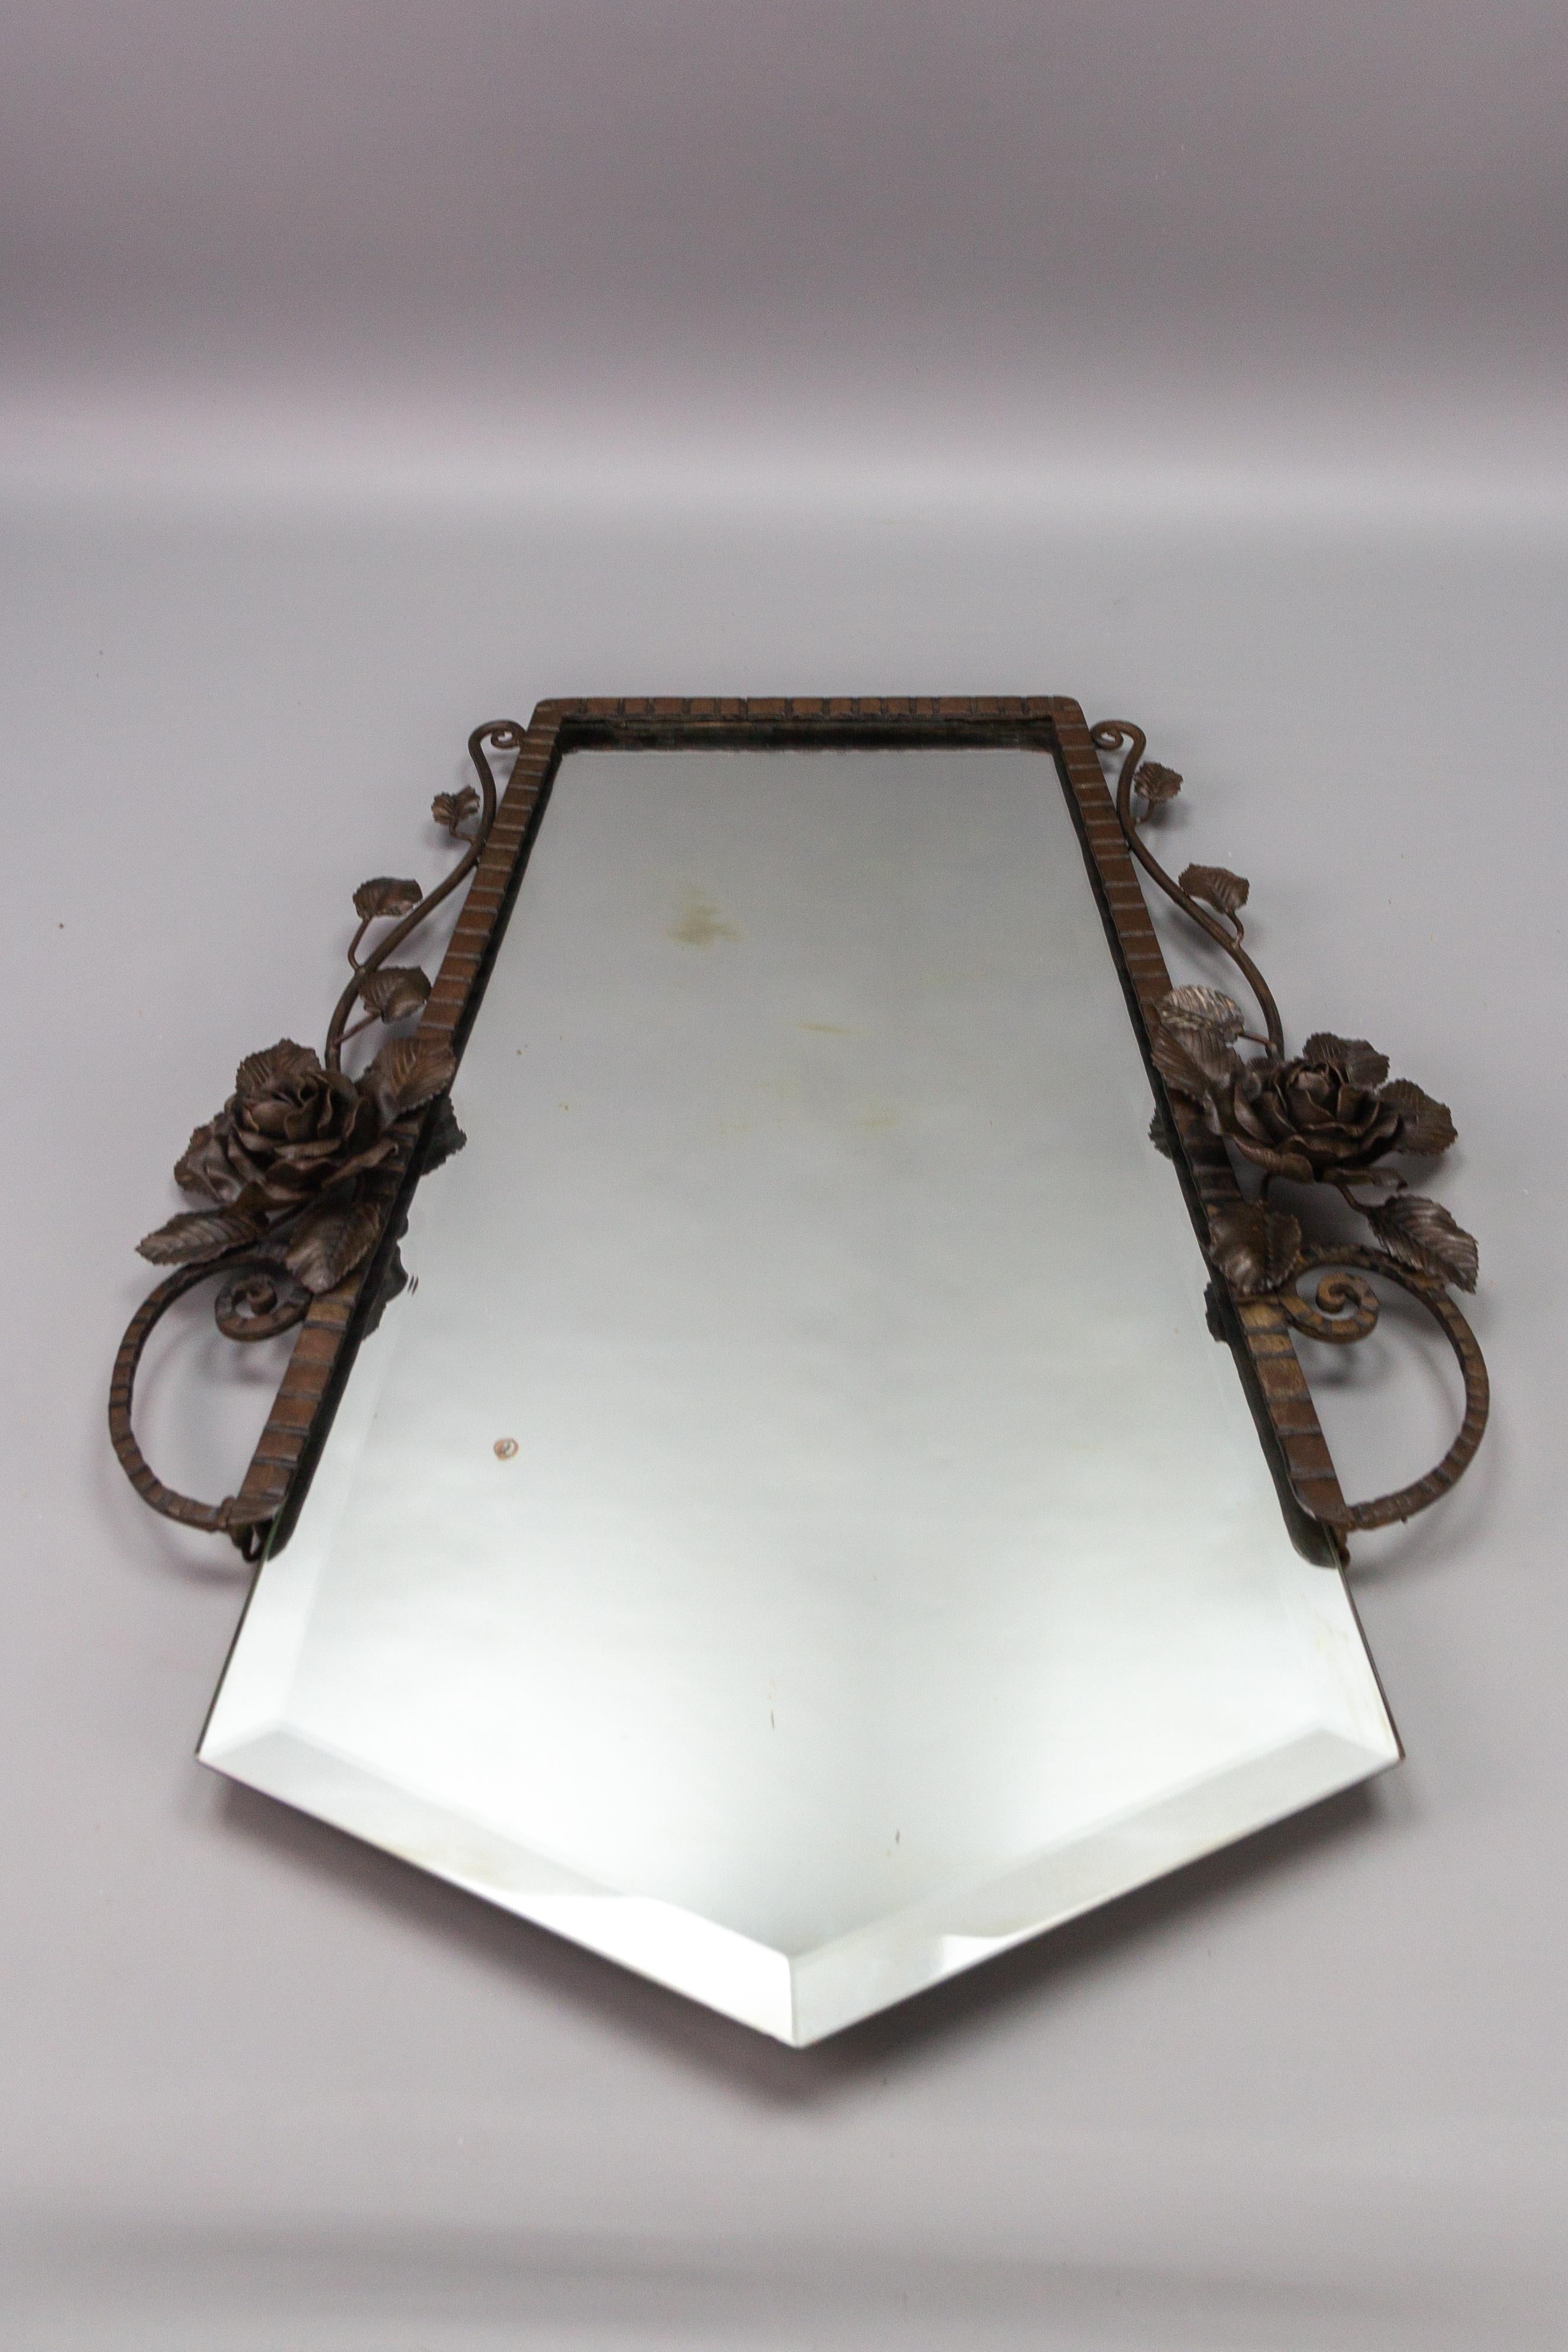 French Art Deco Beveled Wall Mirror with Wrought Iron Frame Roses, 1930s For Sale 4